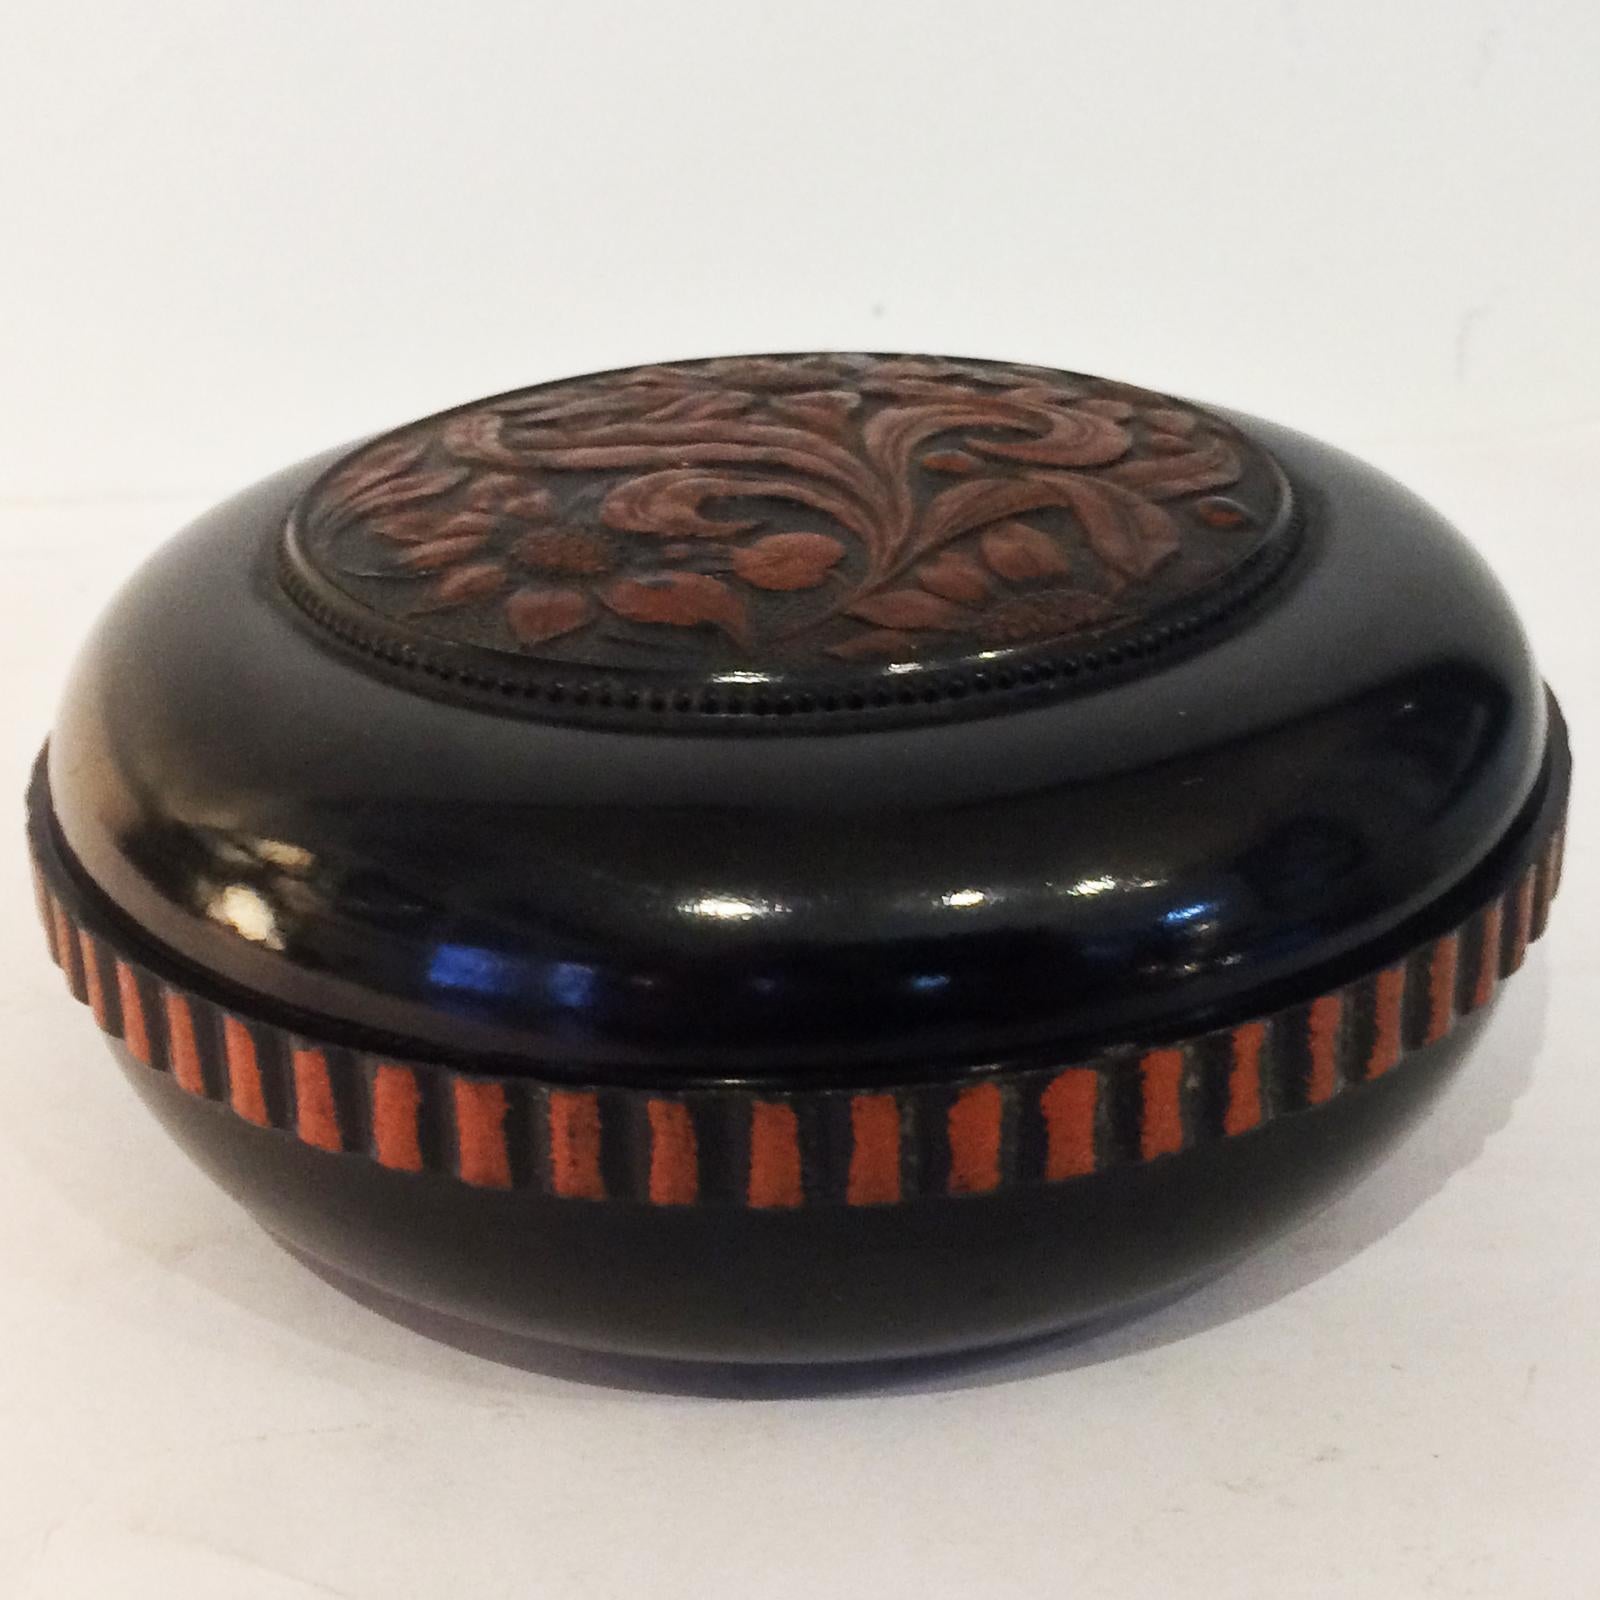 Art Deco carved bakelite and painted gilt highlights, storage box. Very dark brown to black with the bronze highlights to the daisies and leaves to the relief on the screw top cover and coin edge recesses to the lower bowl. The Bakelite is all in